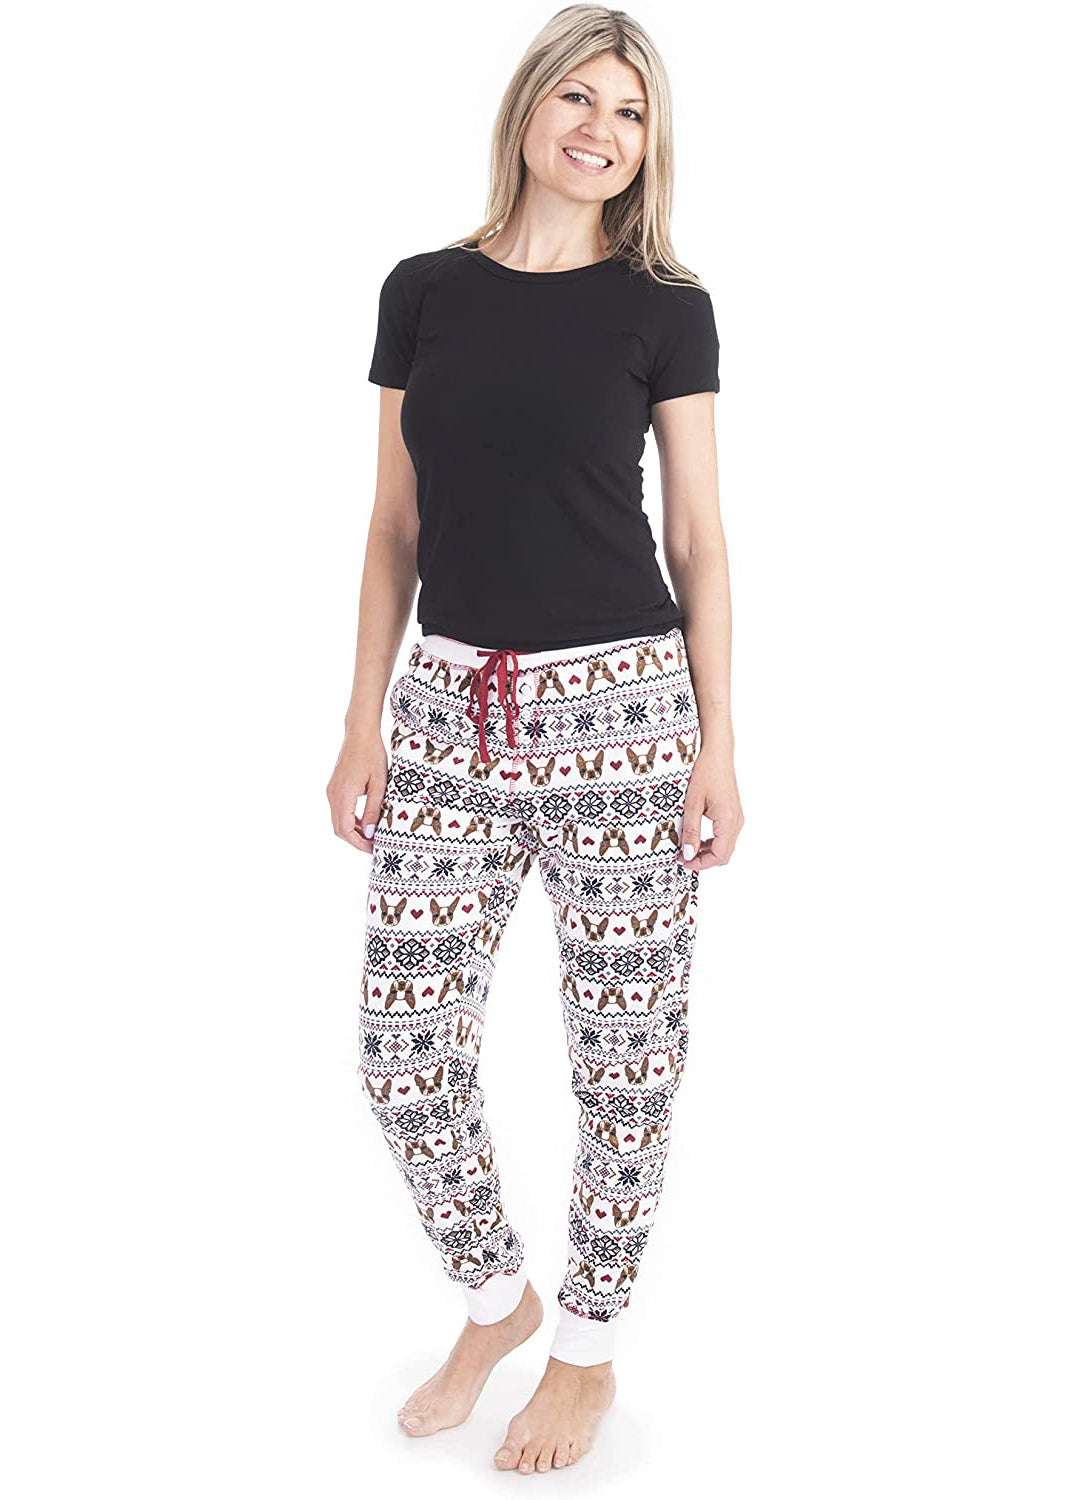 
                  
                    PJ joggers with soft velvety texture, stretch, elastic waistband, drawstring, and stylish ankle cuff. This pattern is bulldog's head with pixelated heart and snowflake pattern.
                  
                